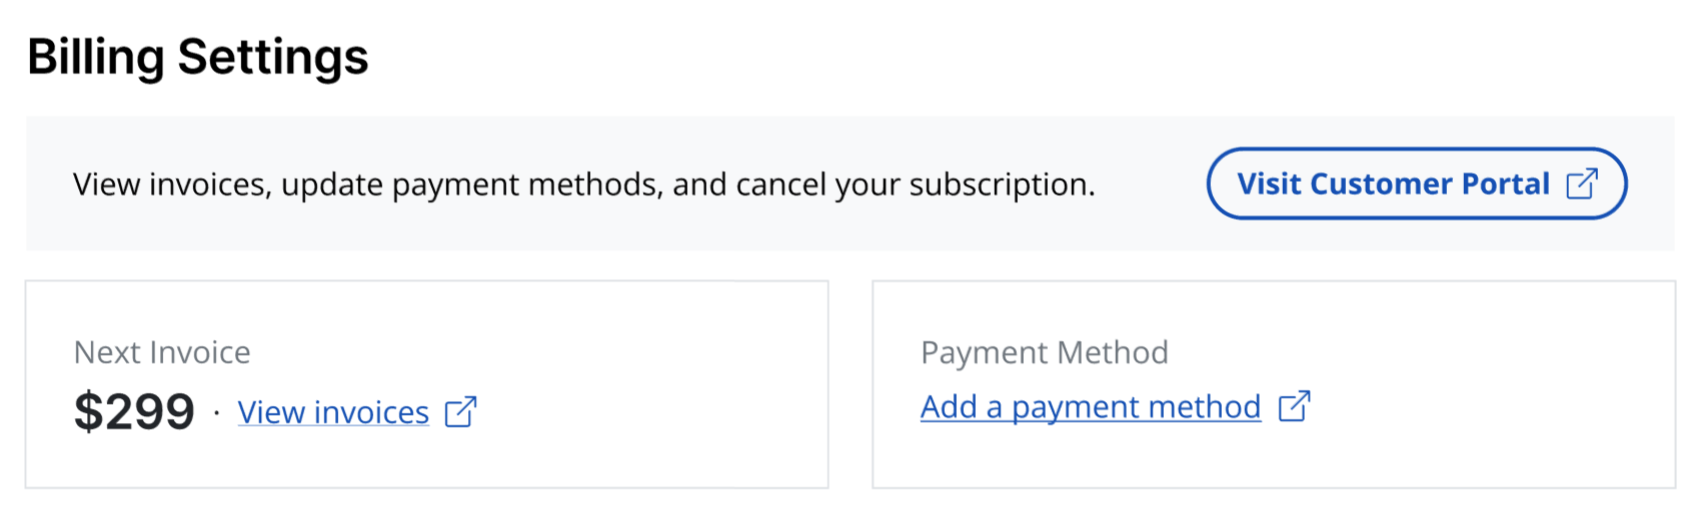 The Billing Settings section of an Organization. There is a button to visit the customer portal, the next invoice amount, and a link to add a payment method.